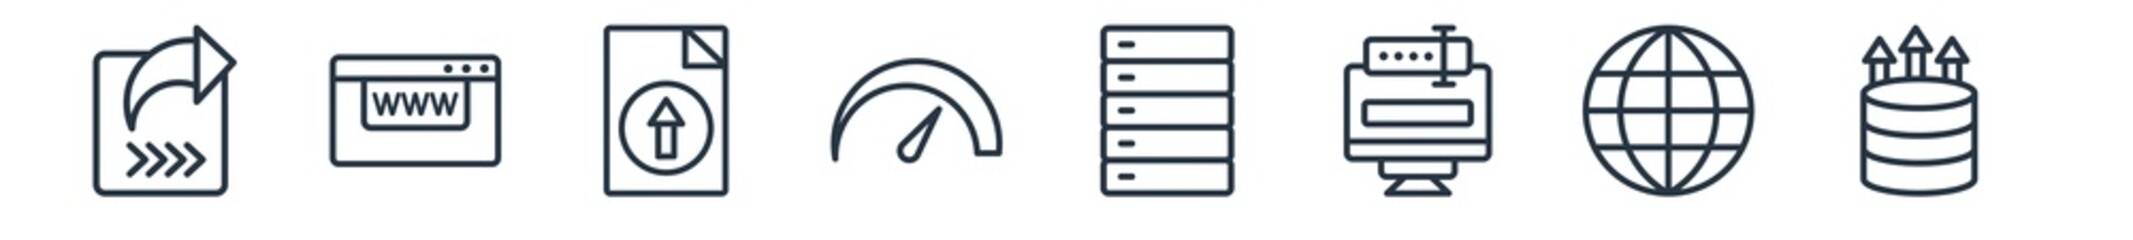 linear set of web hosting outline icons. line vector icons such as forwarding, domains, upload file, bandwidth, raid, improve vector illustration.